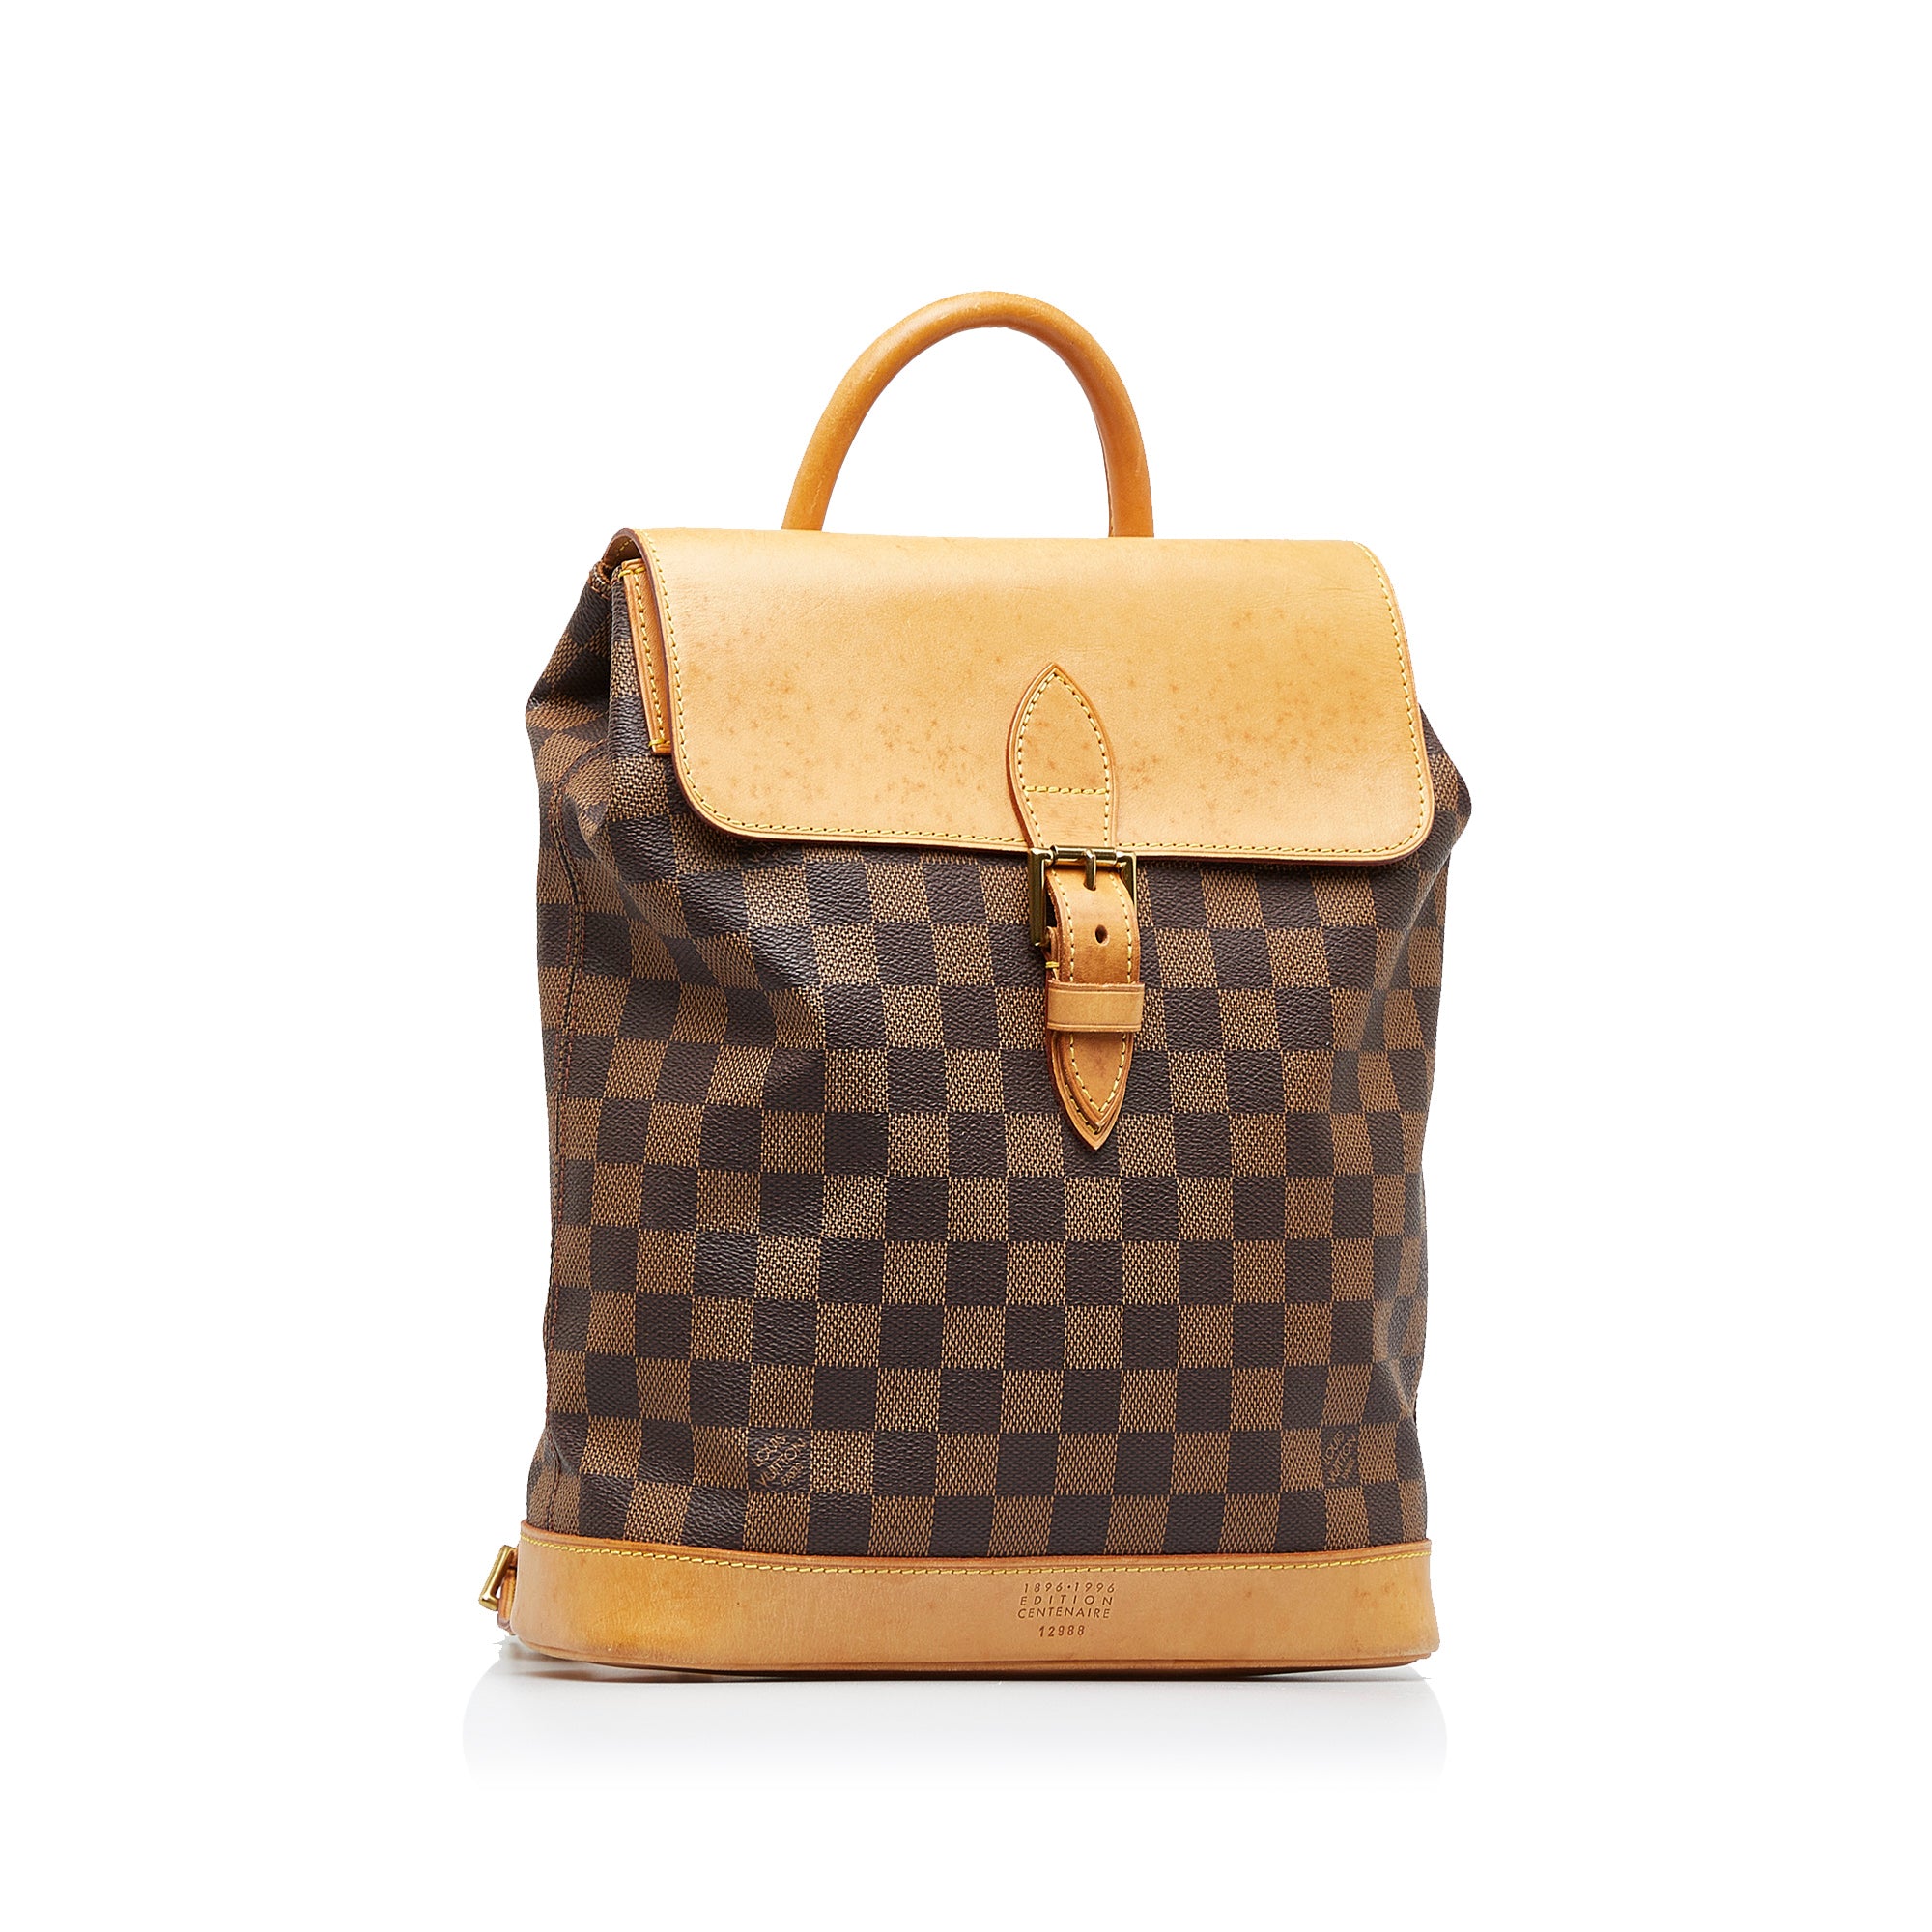 Louis Vuitton backpack in ebene damier canvas and brown leather